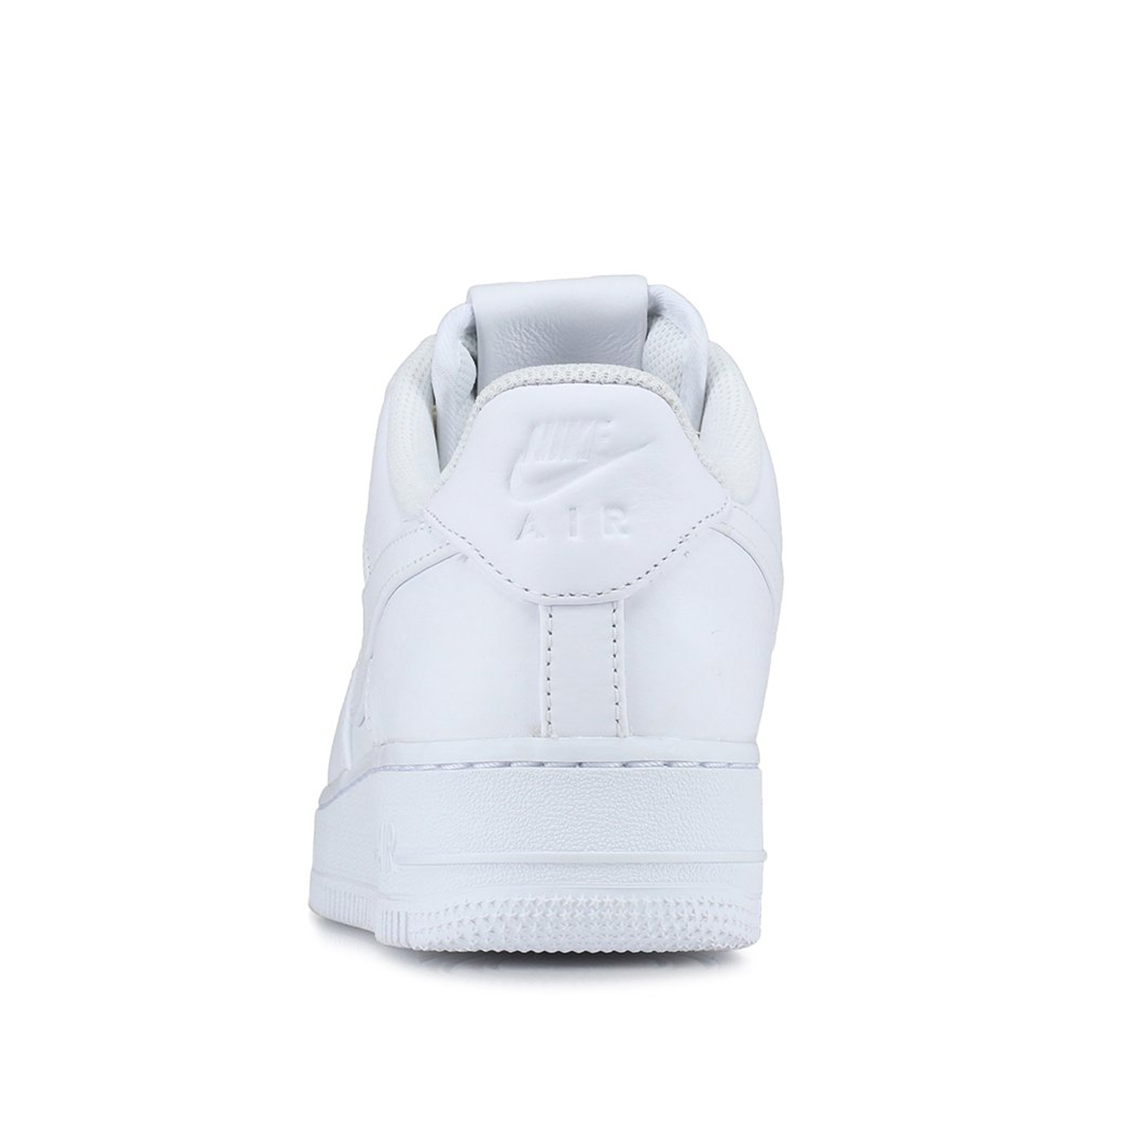 Nike Air Force 1 Low Oversized Swoosh White At4143 103 6